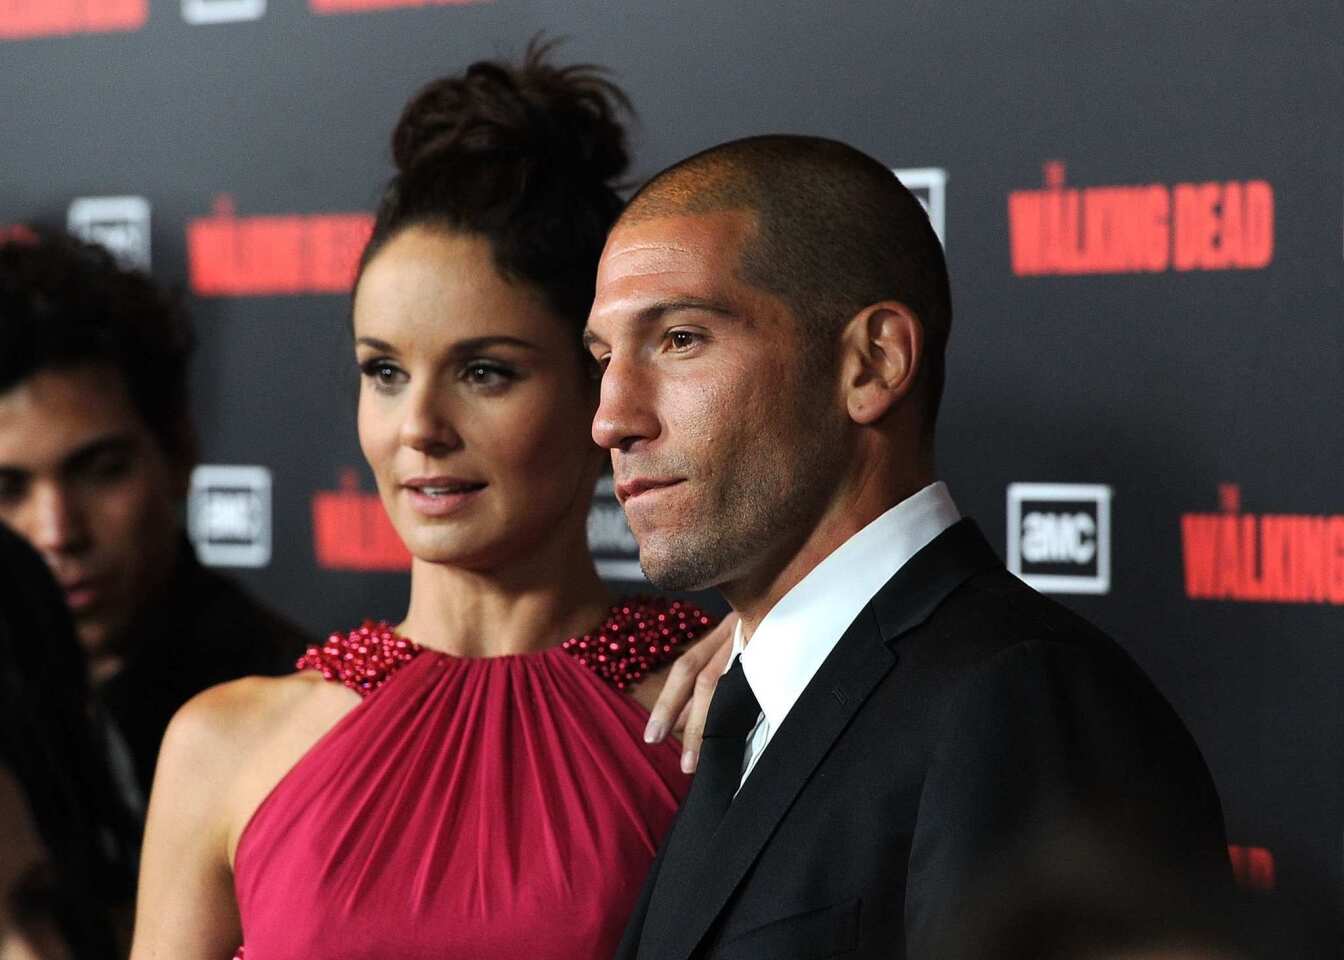 "The Walking Dead" stars Sarah Wayne Callies and Jon Bernthal pose at the Season 2 premiere of their AMC series at the LA Live Theaters on Oct. 3. Their Emmy-nominated series about survivors fleeing the zombie apocalypse returns Oct. 16.